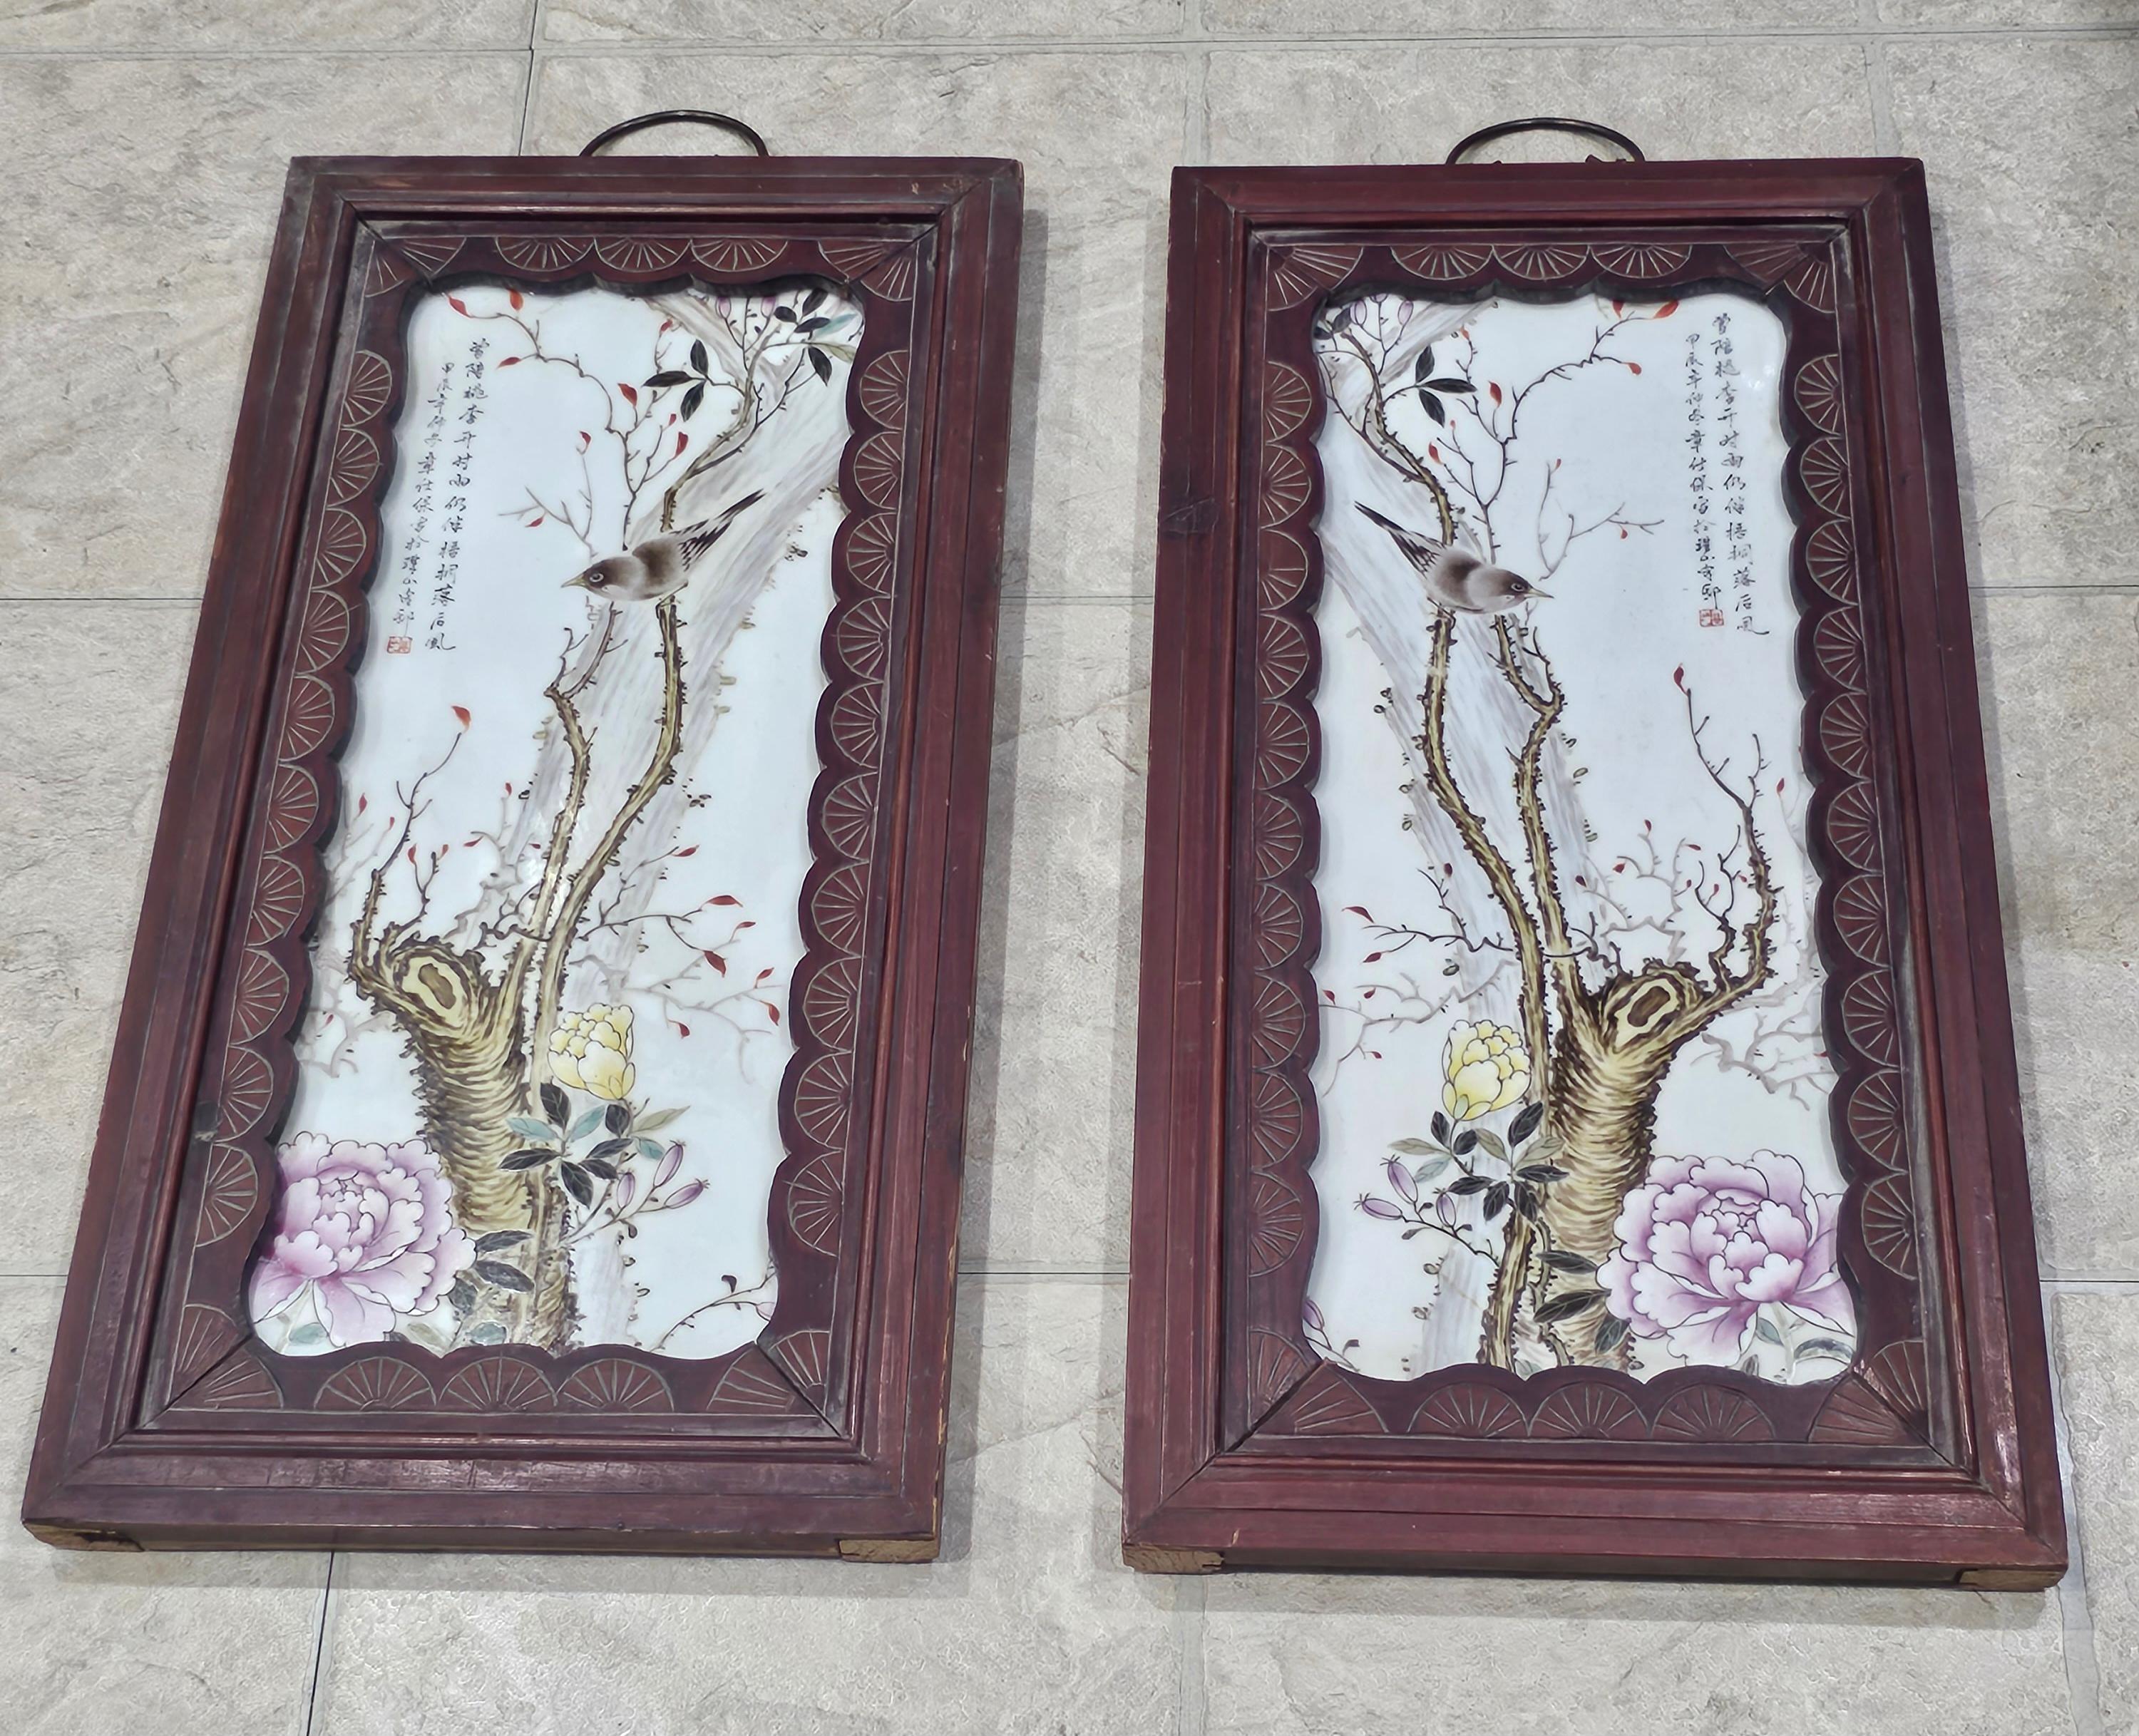 19th Century Pair of Chinese Famille Rose Porcelain Plaques Carved Wood Frames For Sale 3